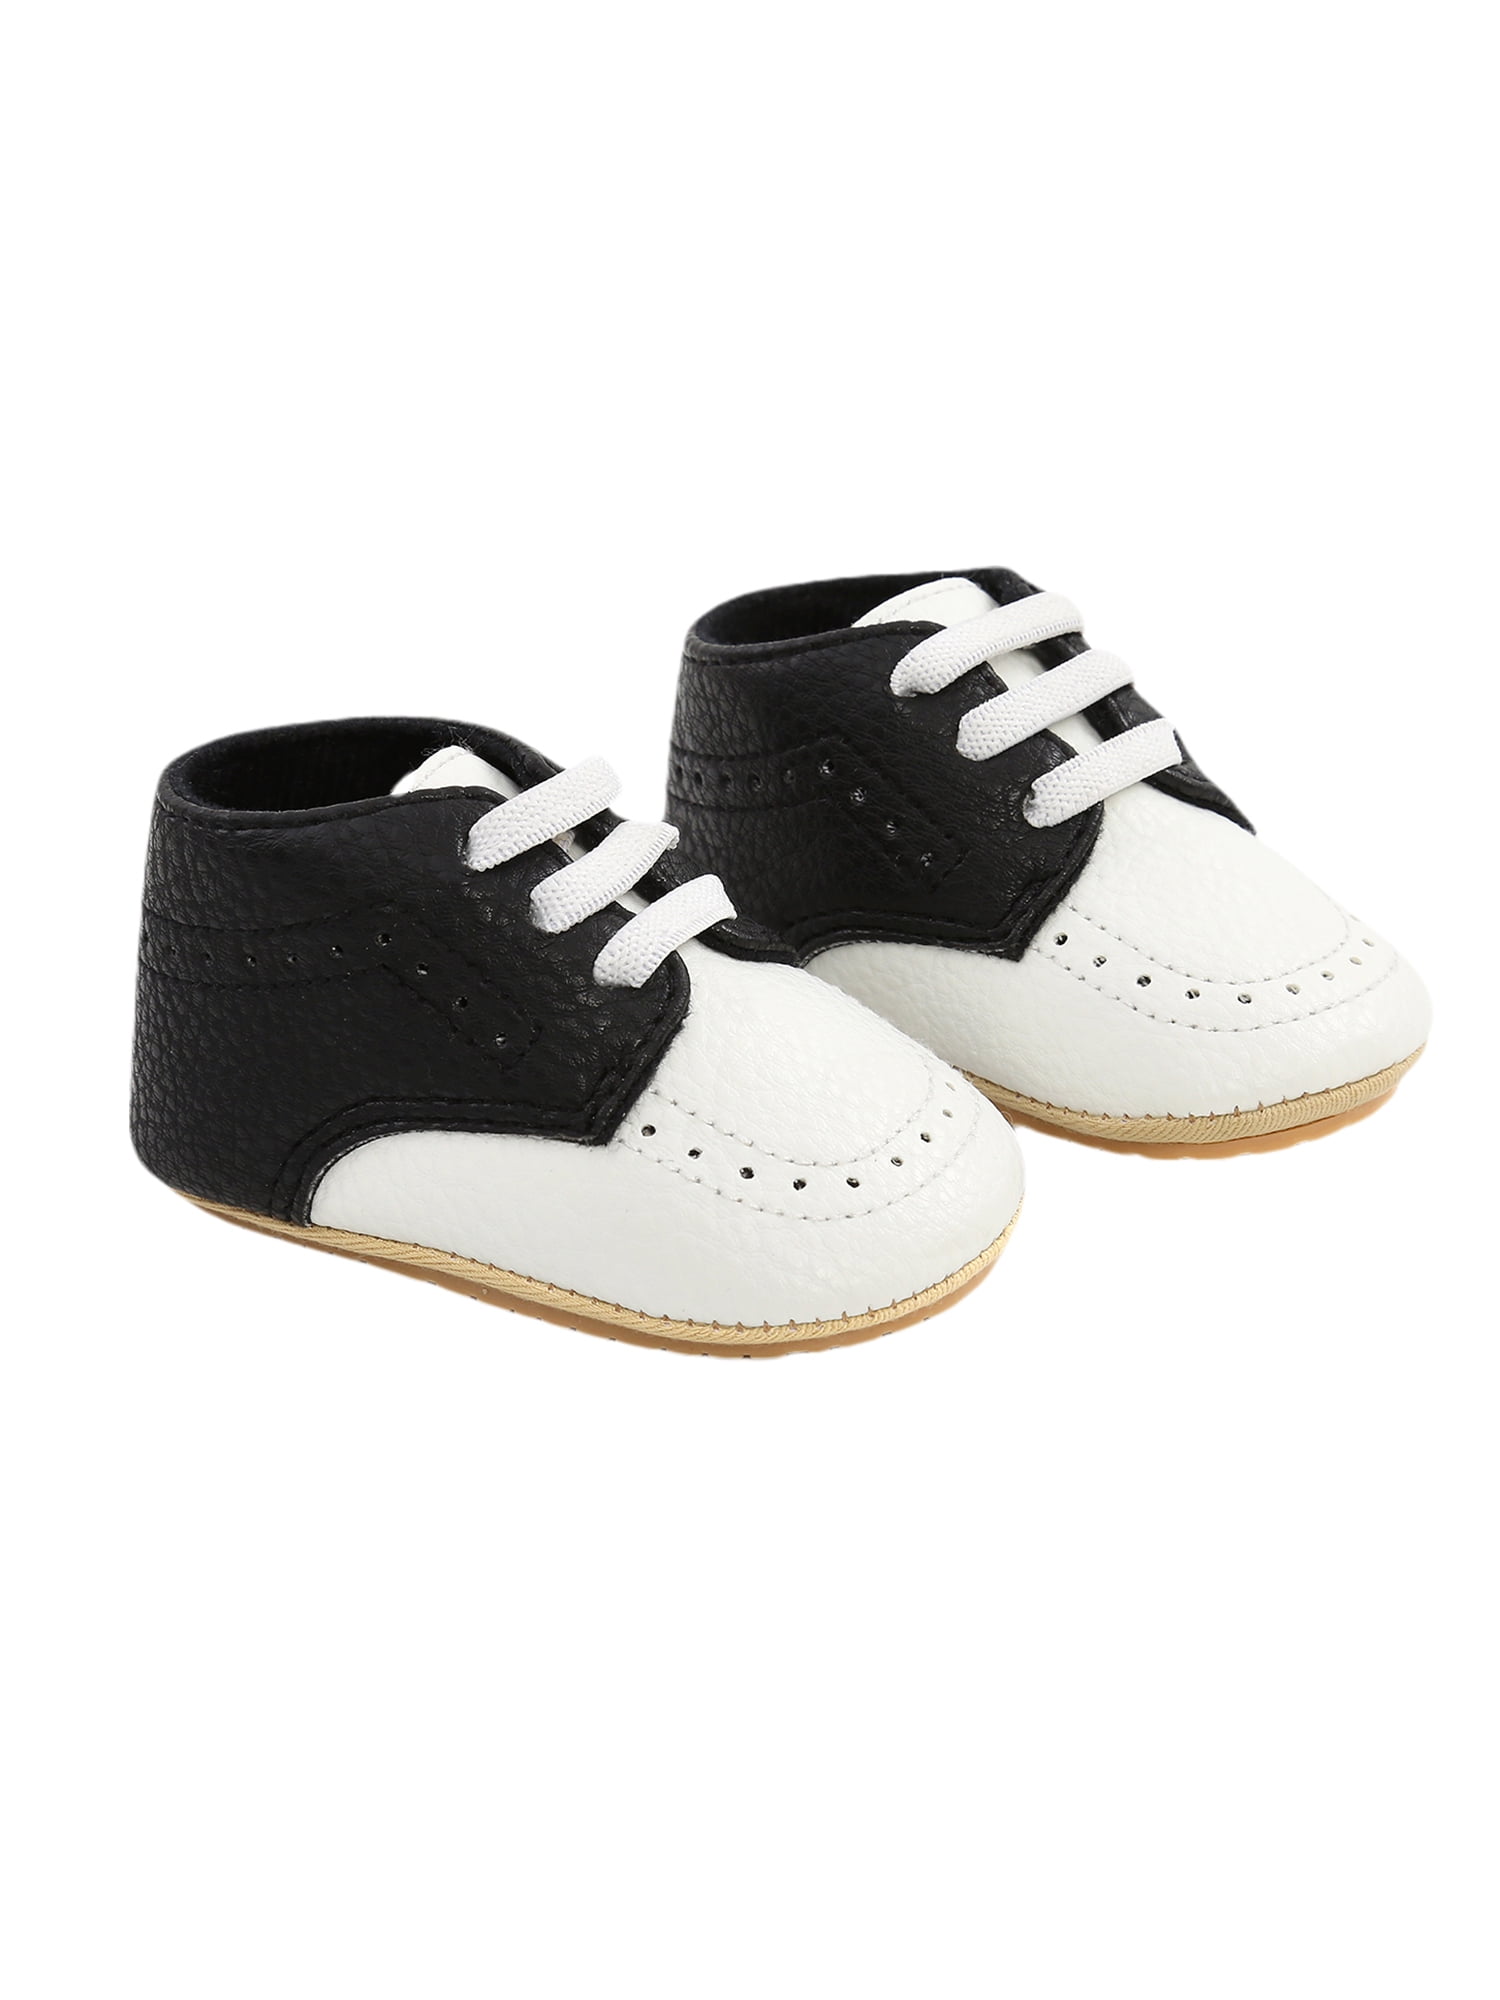 The Best Baby Shoes for New Walkers